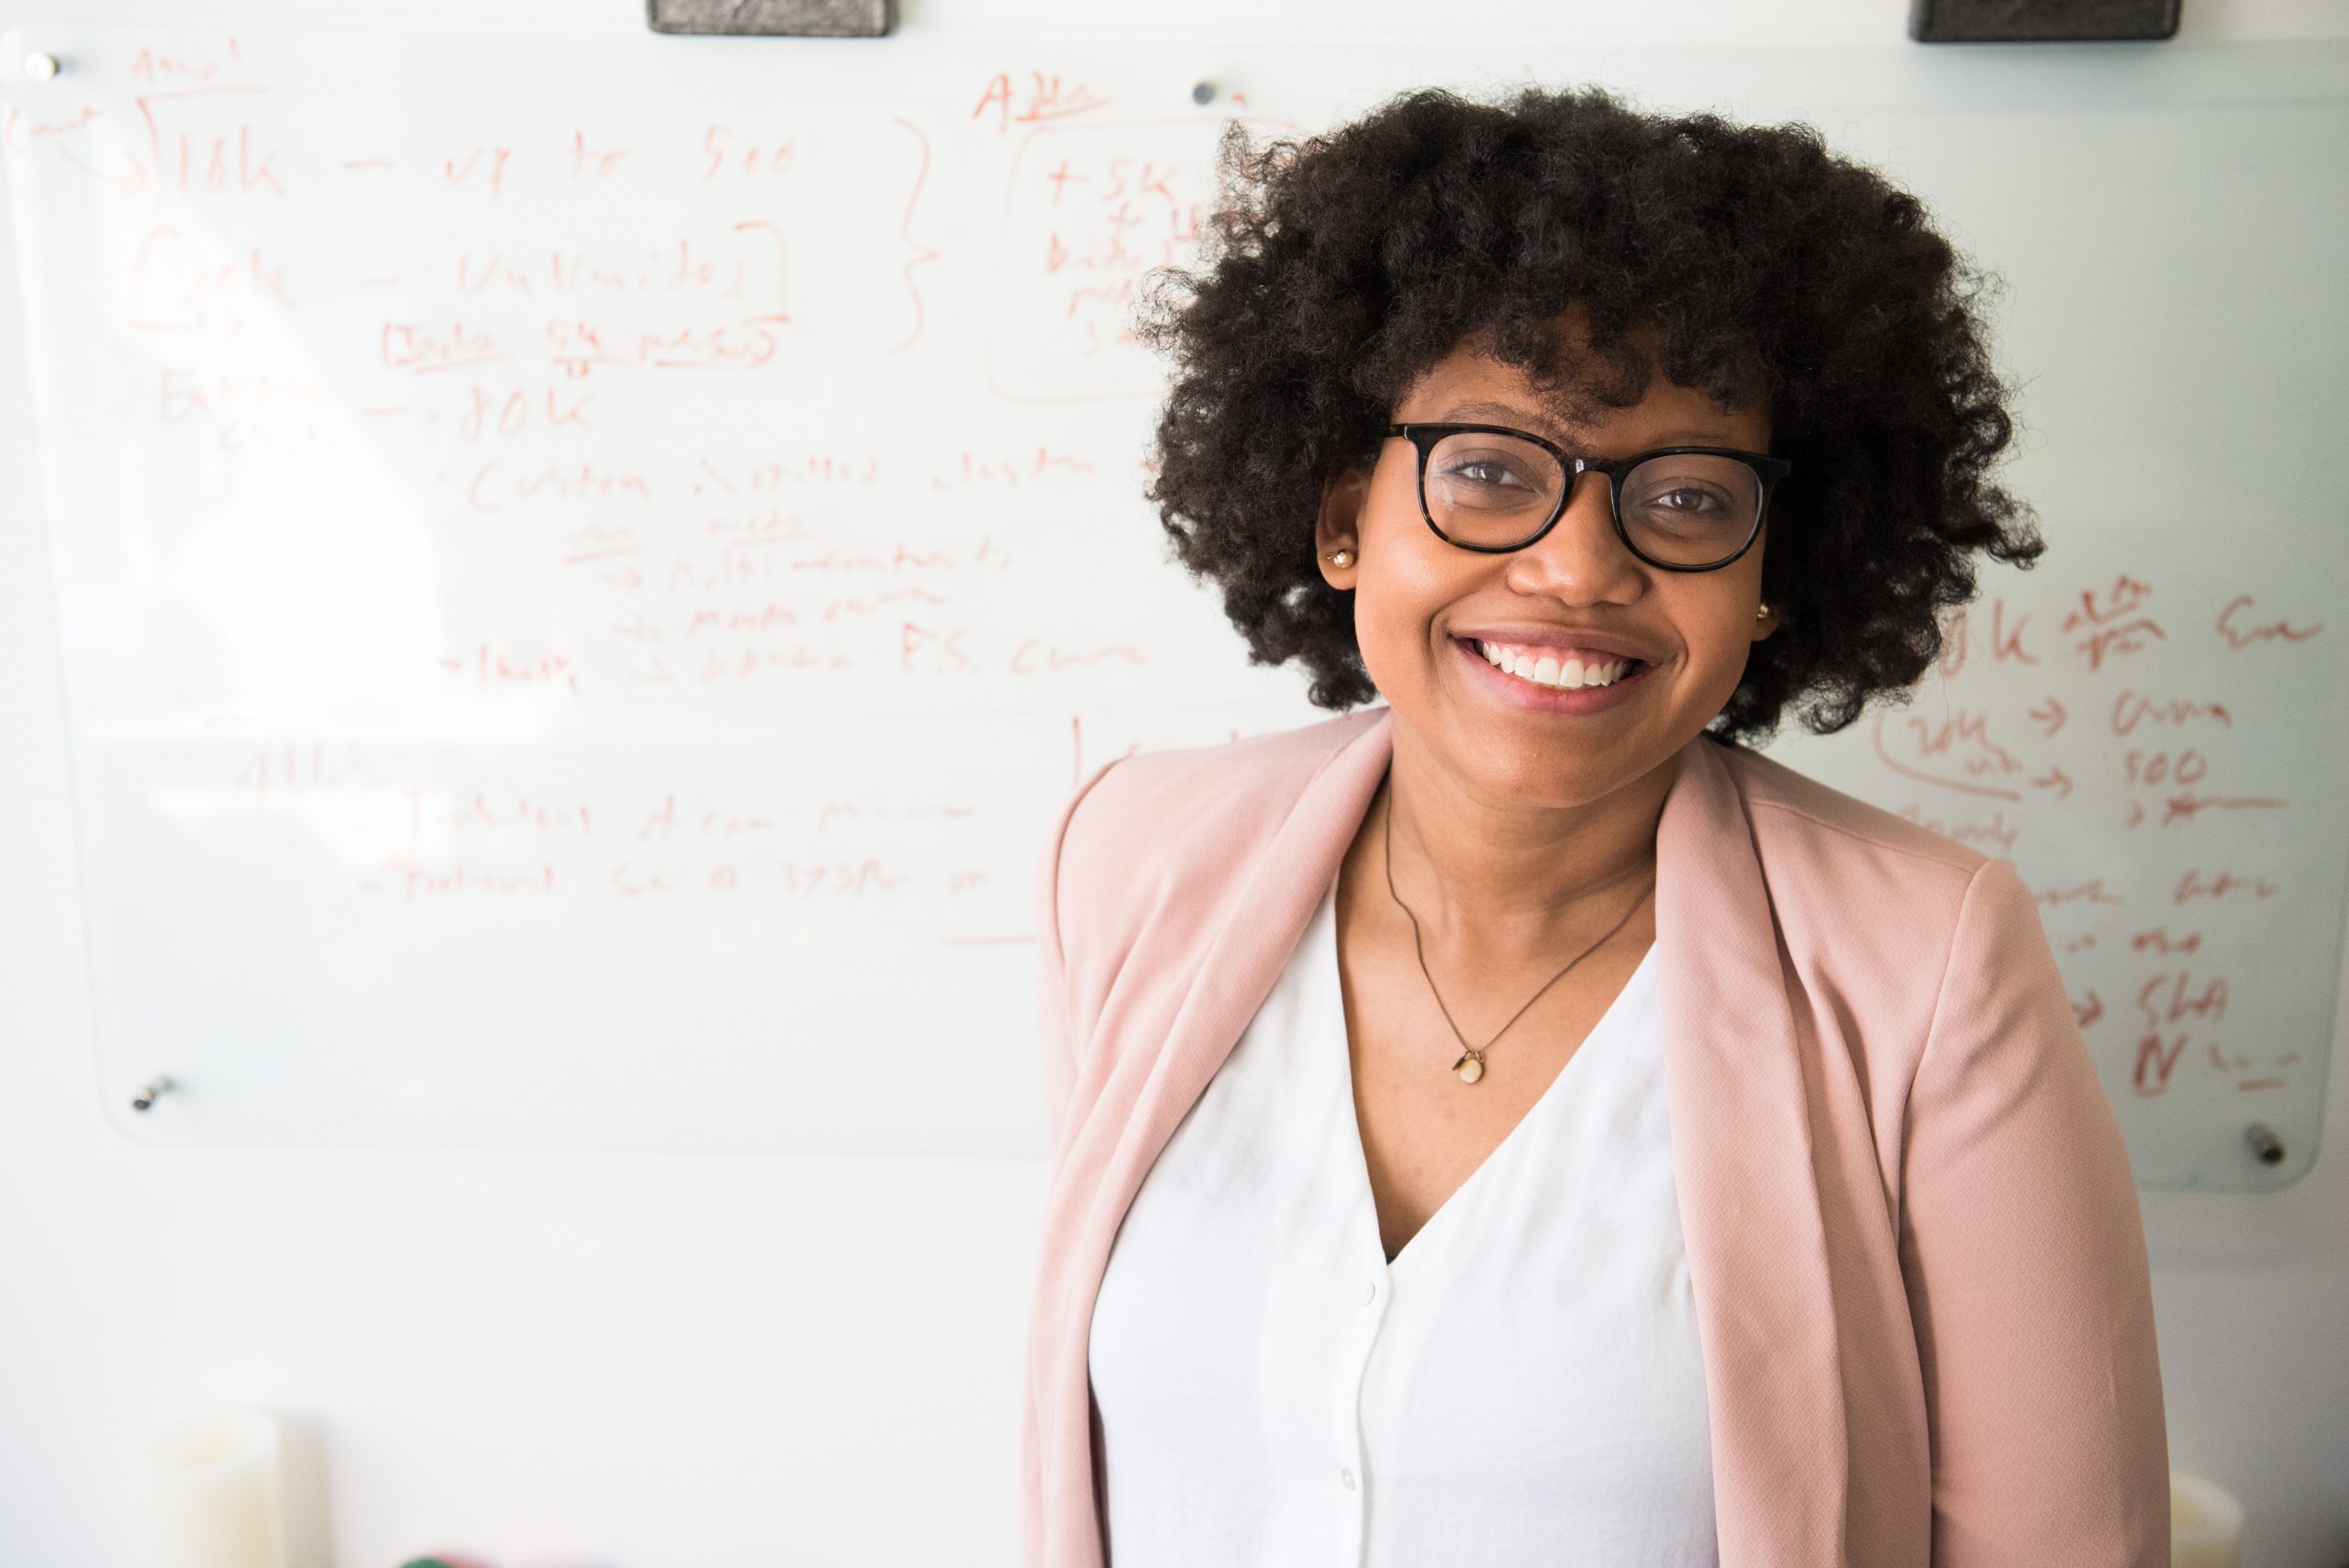 Female, African-American Professor smiles in front of a whiteboard covered with mathematical notations